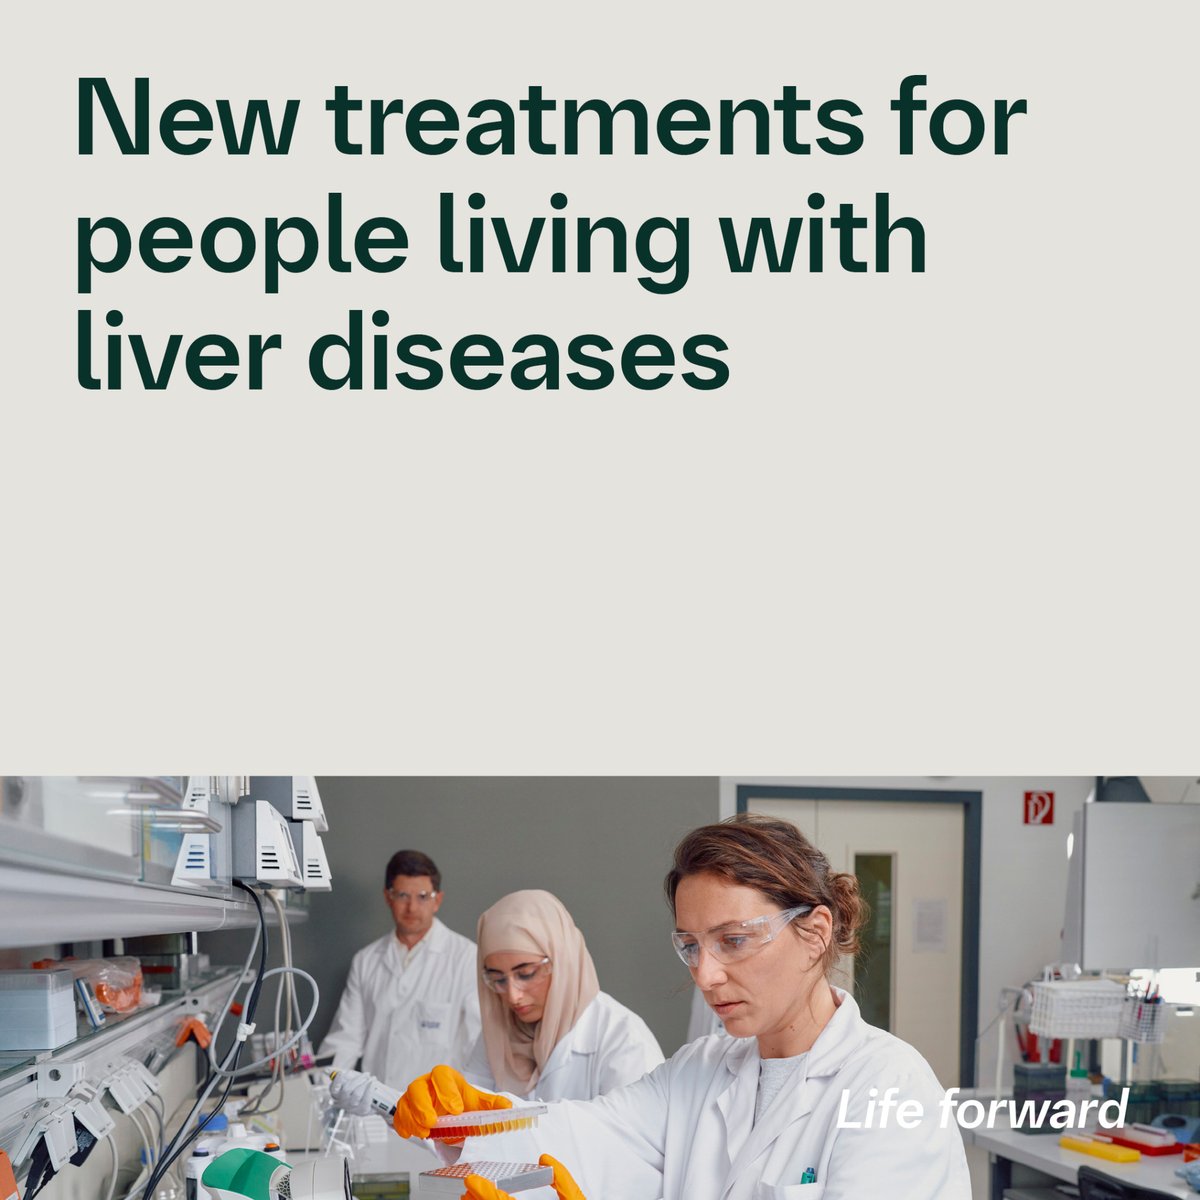 #NEWS: We are partnering with Ribo Life Science and Ribocure Pharmaceuticals to develop new effective treatments for NASH/MASH - one of the most urgent patient needs. Learn more: bit.ly/48gOG9J #NASH #Innovation #LifeForward